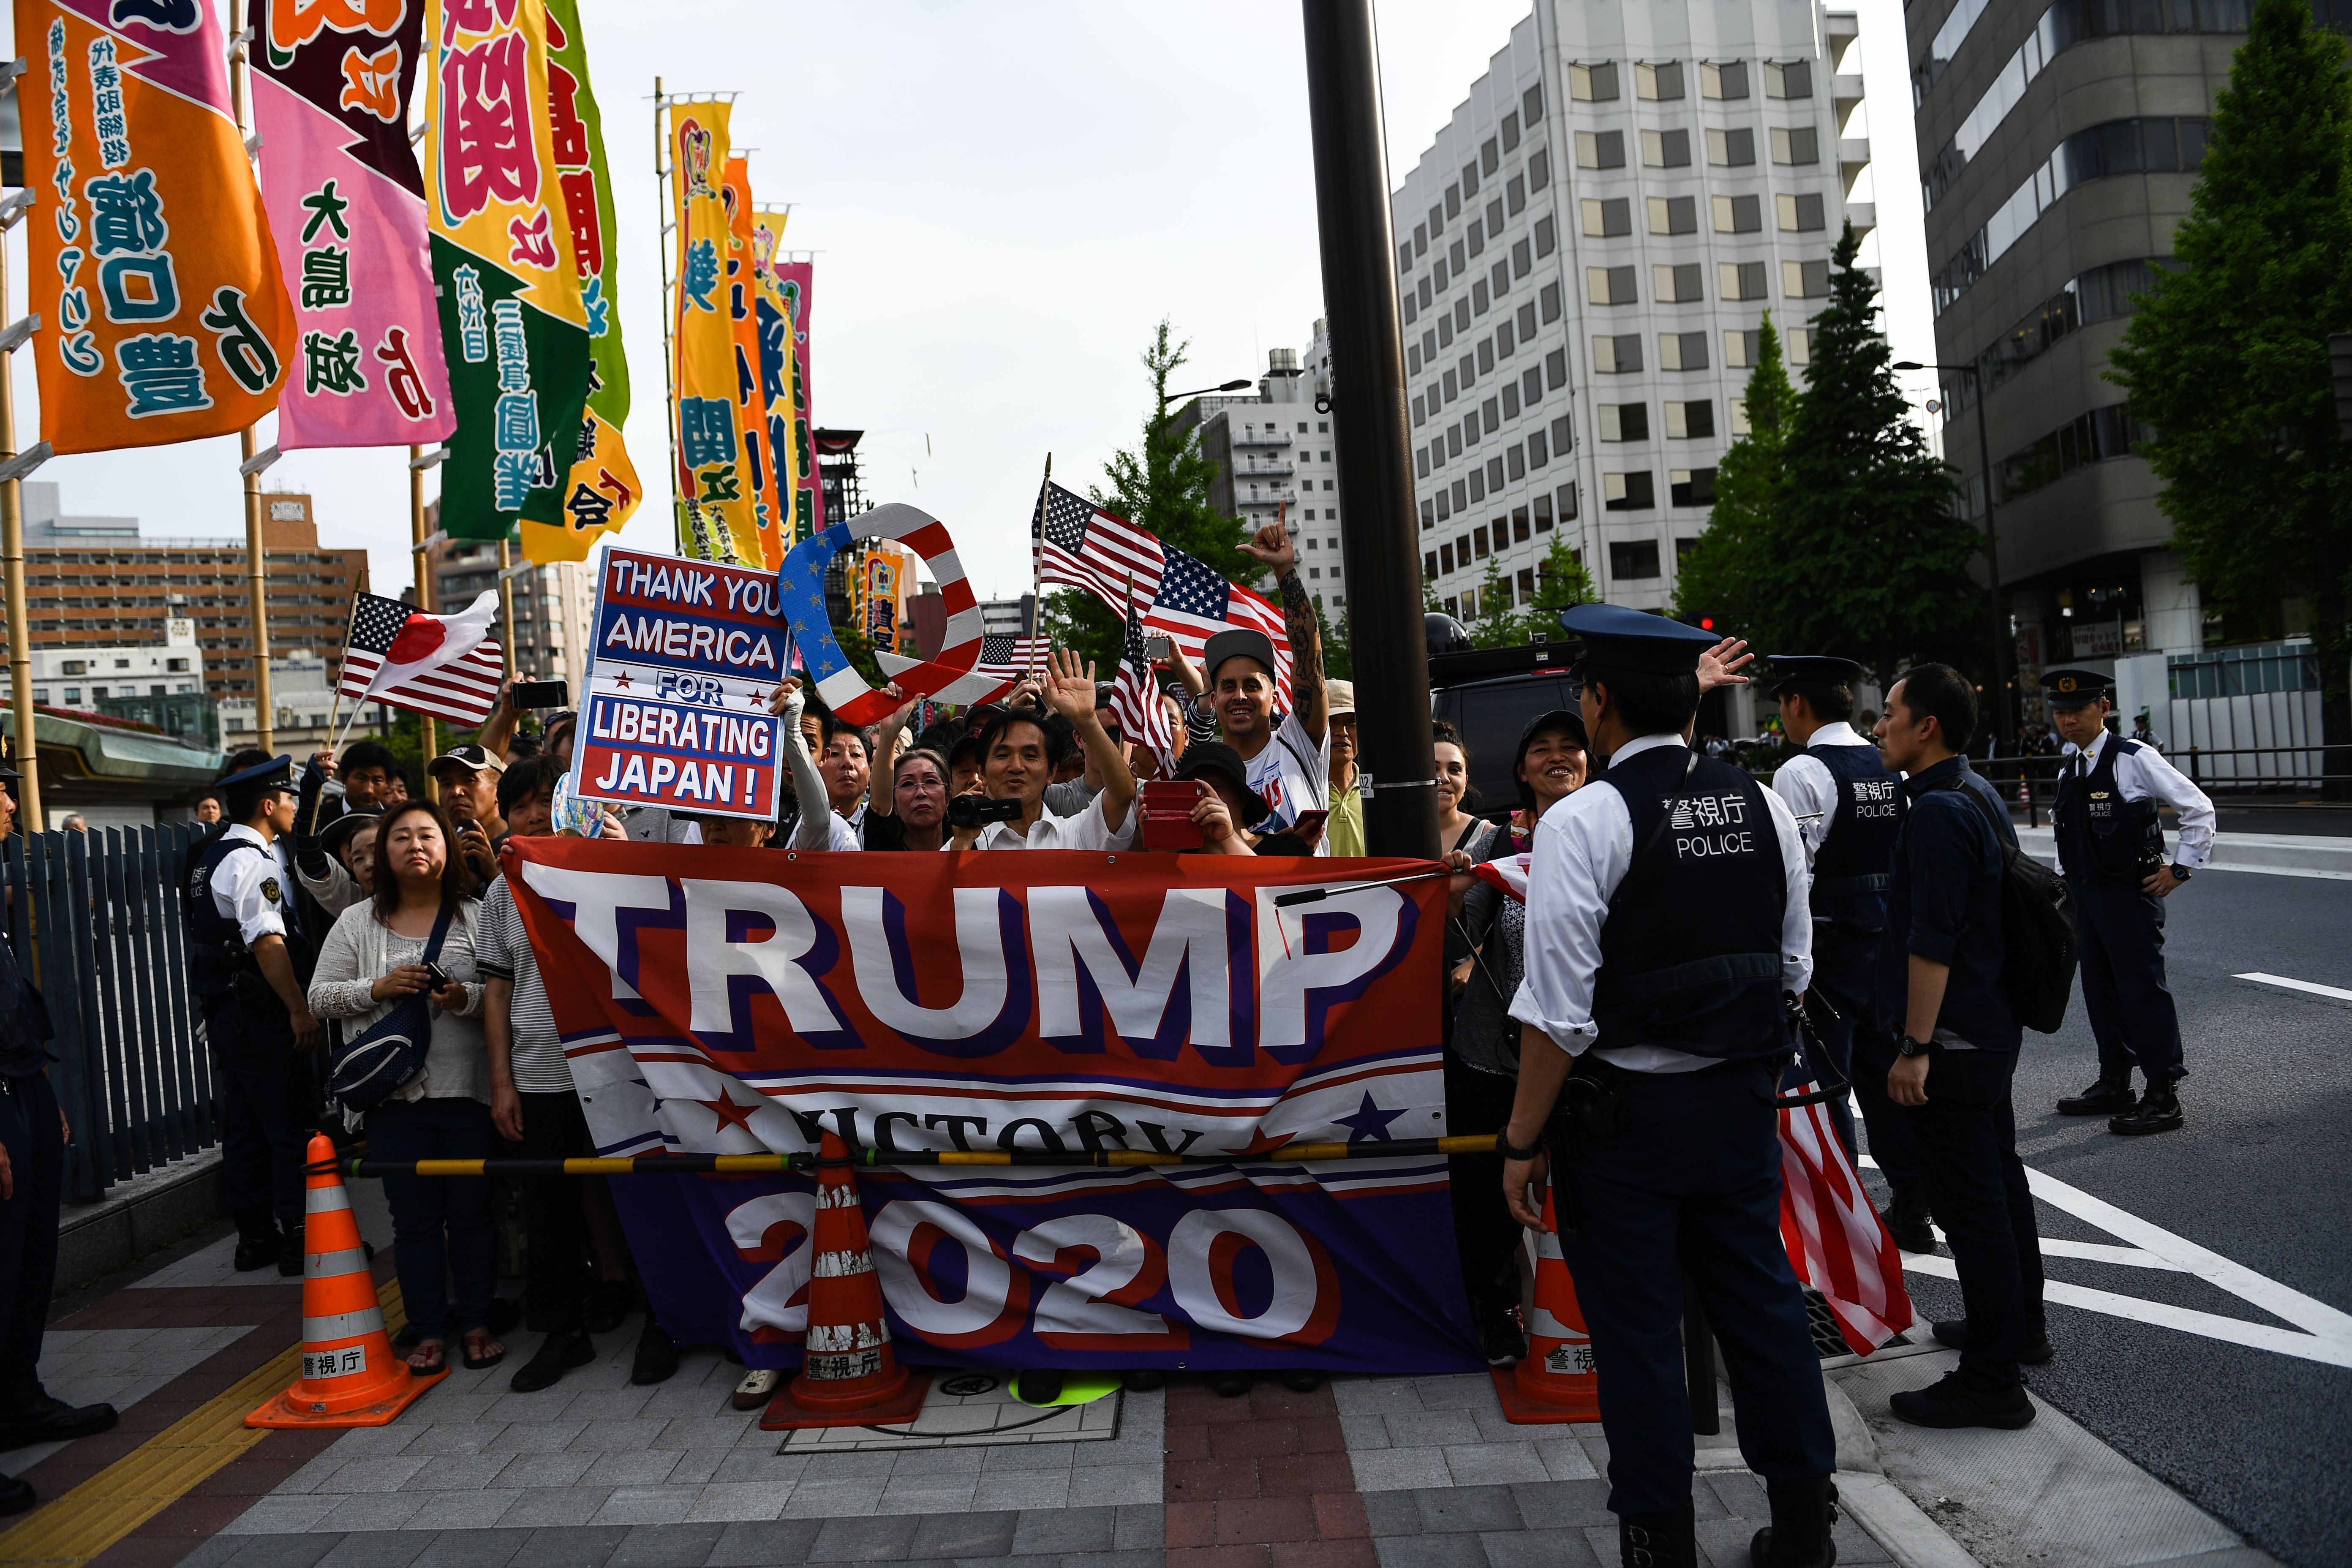 Supporters near Ryogoku Kokugikan Stadium before the arrival of the Trumps for the Summer Grand Sumo Tournament. 